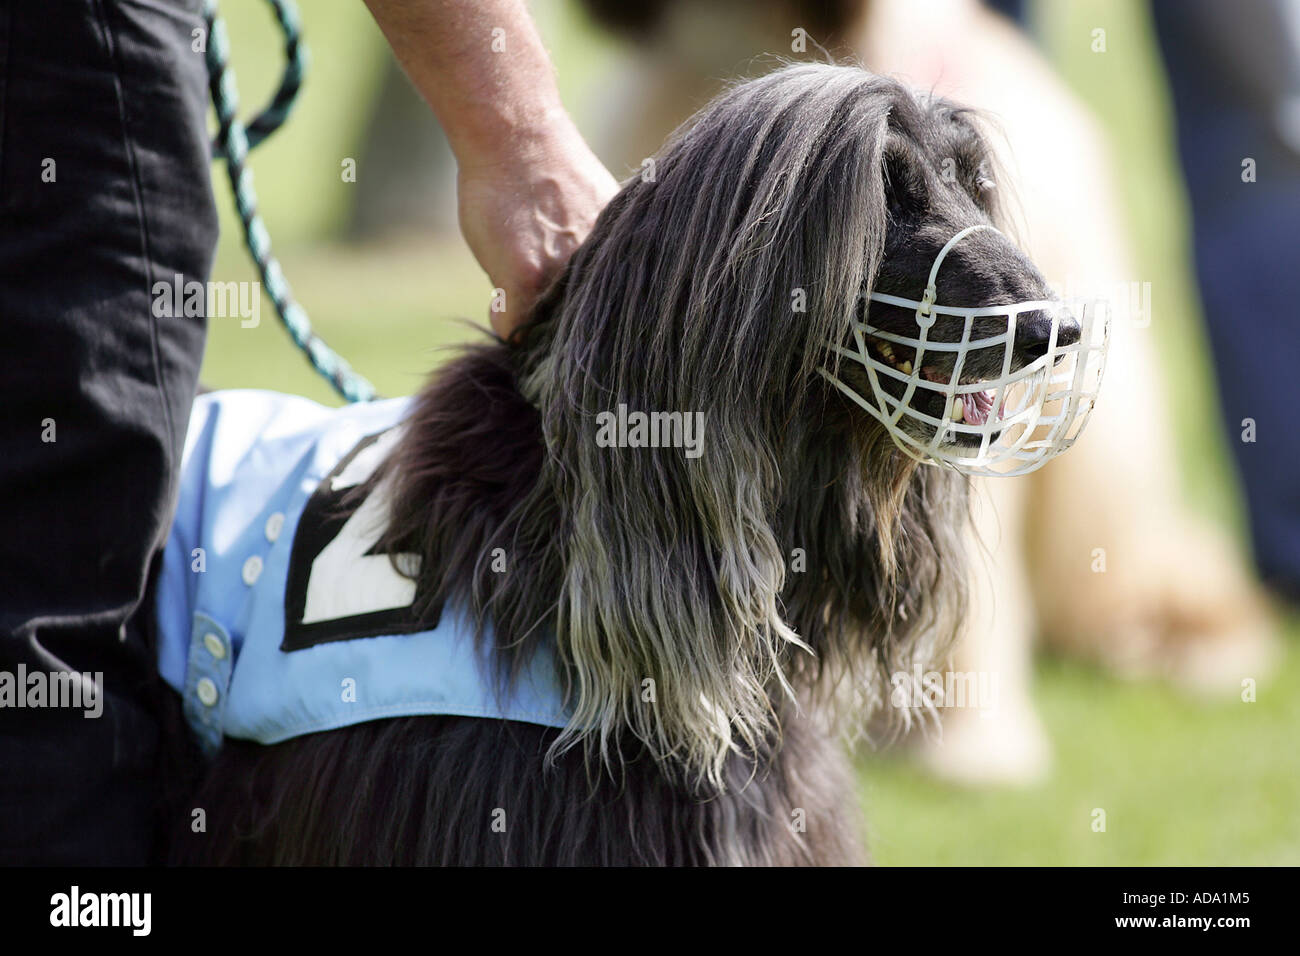 Afghanistan Hound, Afghan Hound (Canis lupus f. familiaris), portrait with muzzle, Germany Stock Photo